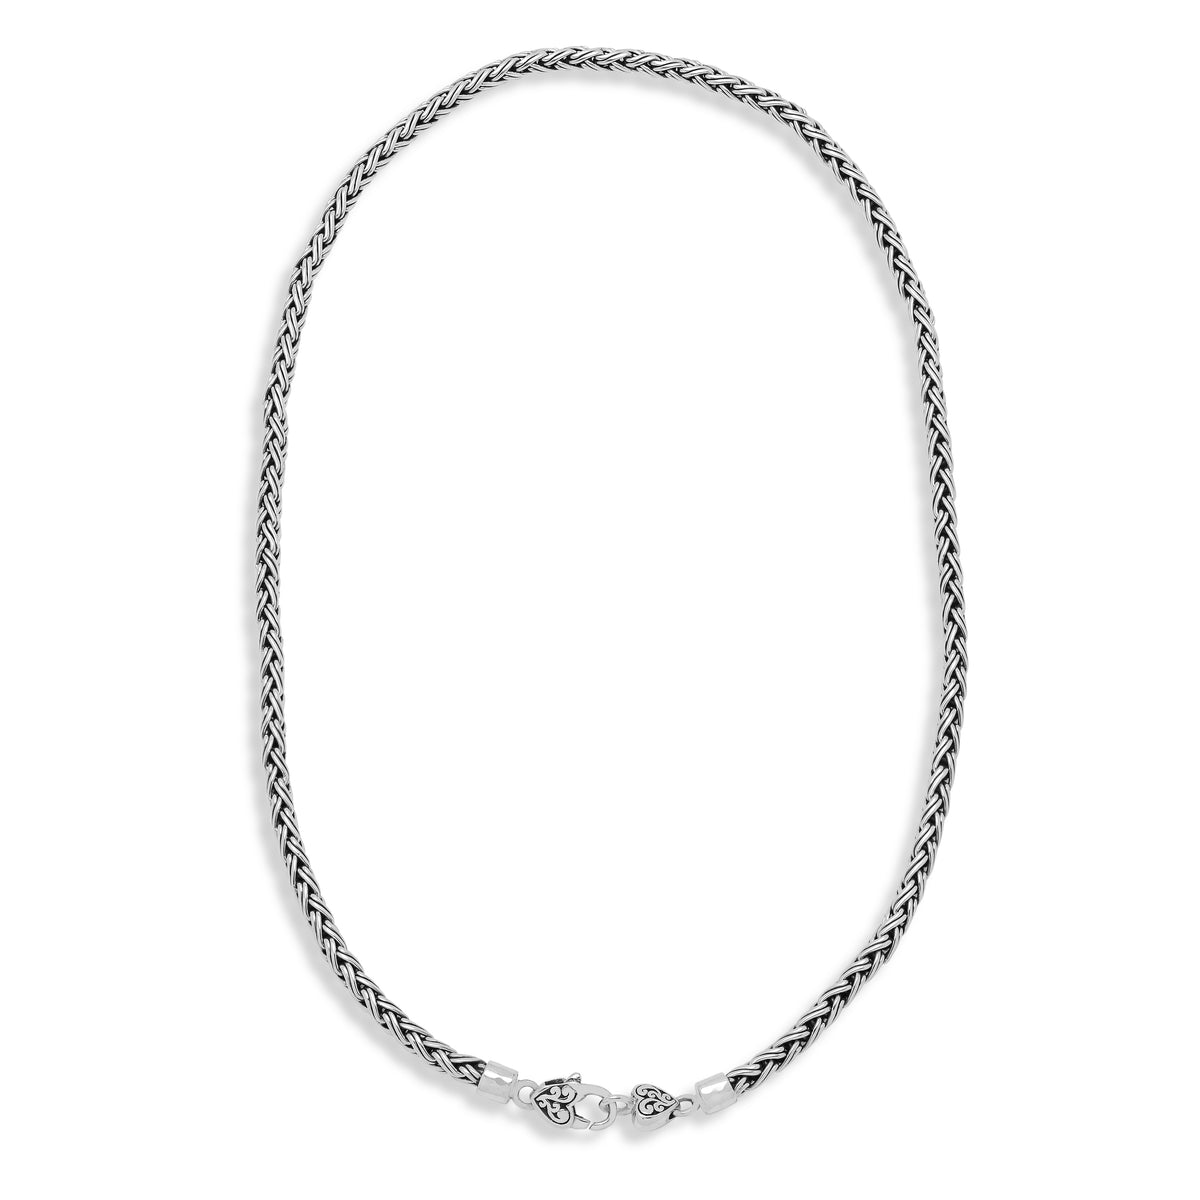 Lois by Lois Hill 2nd Century Hand Woven Chain with Heart Shaped Closure - Lois Hill Jewelry